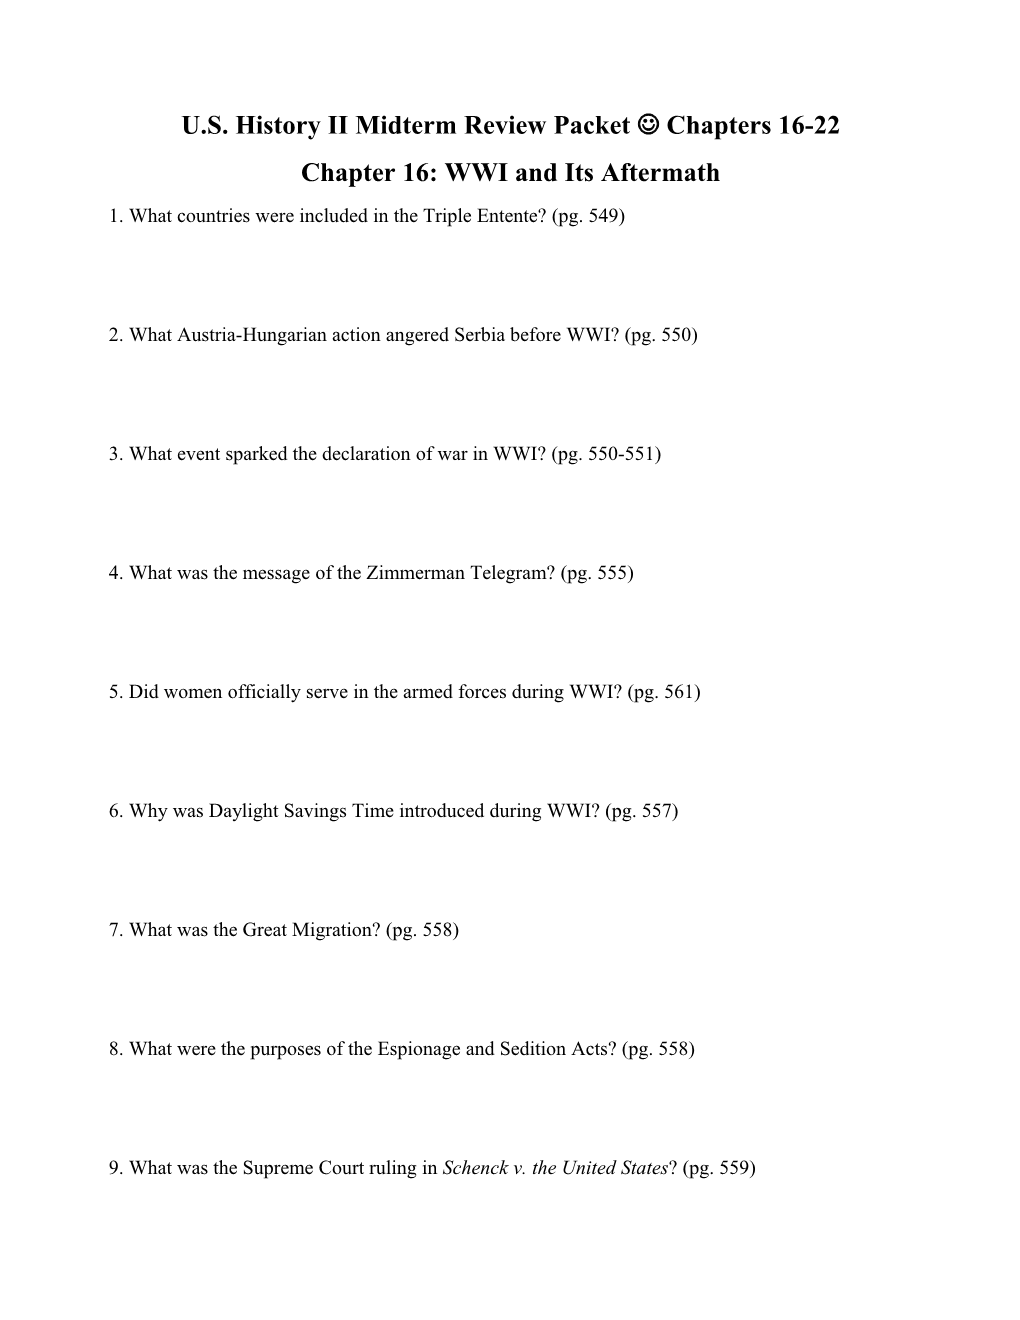 U.S. History II Midterm Review Packet Chapters 16-22